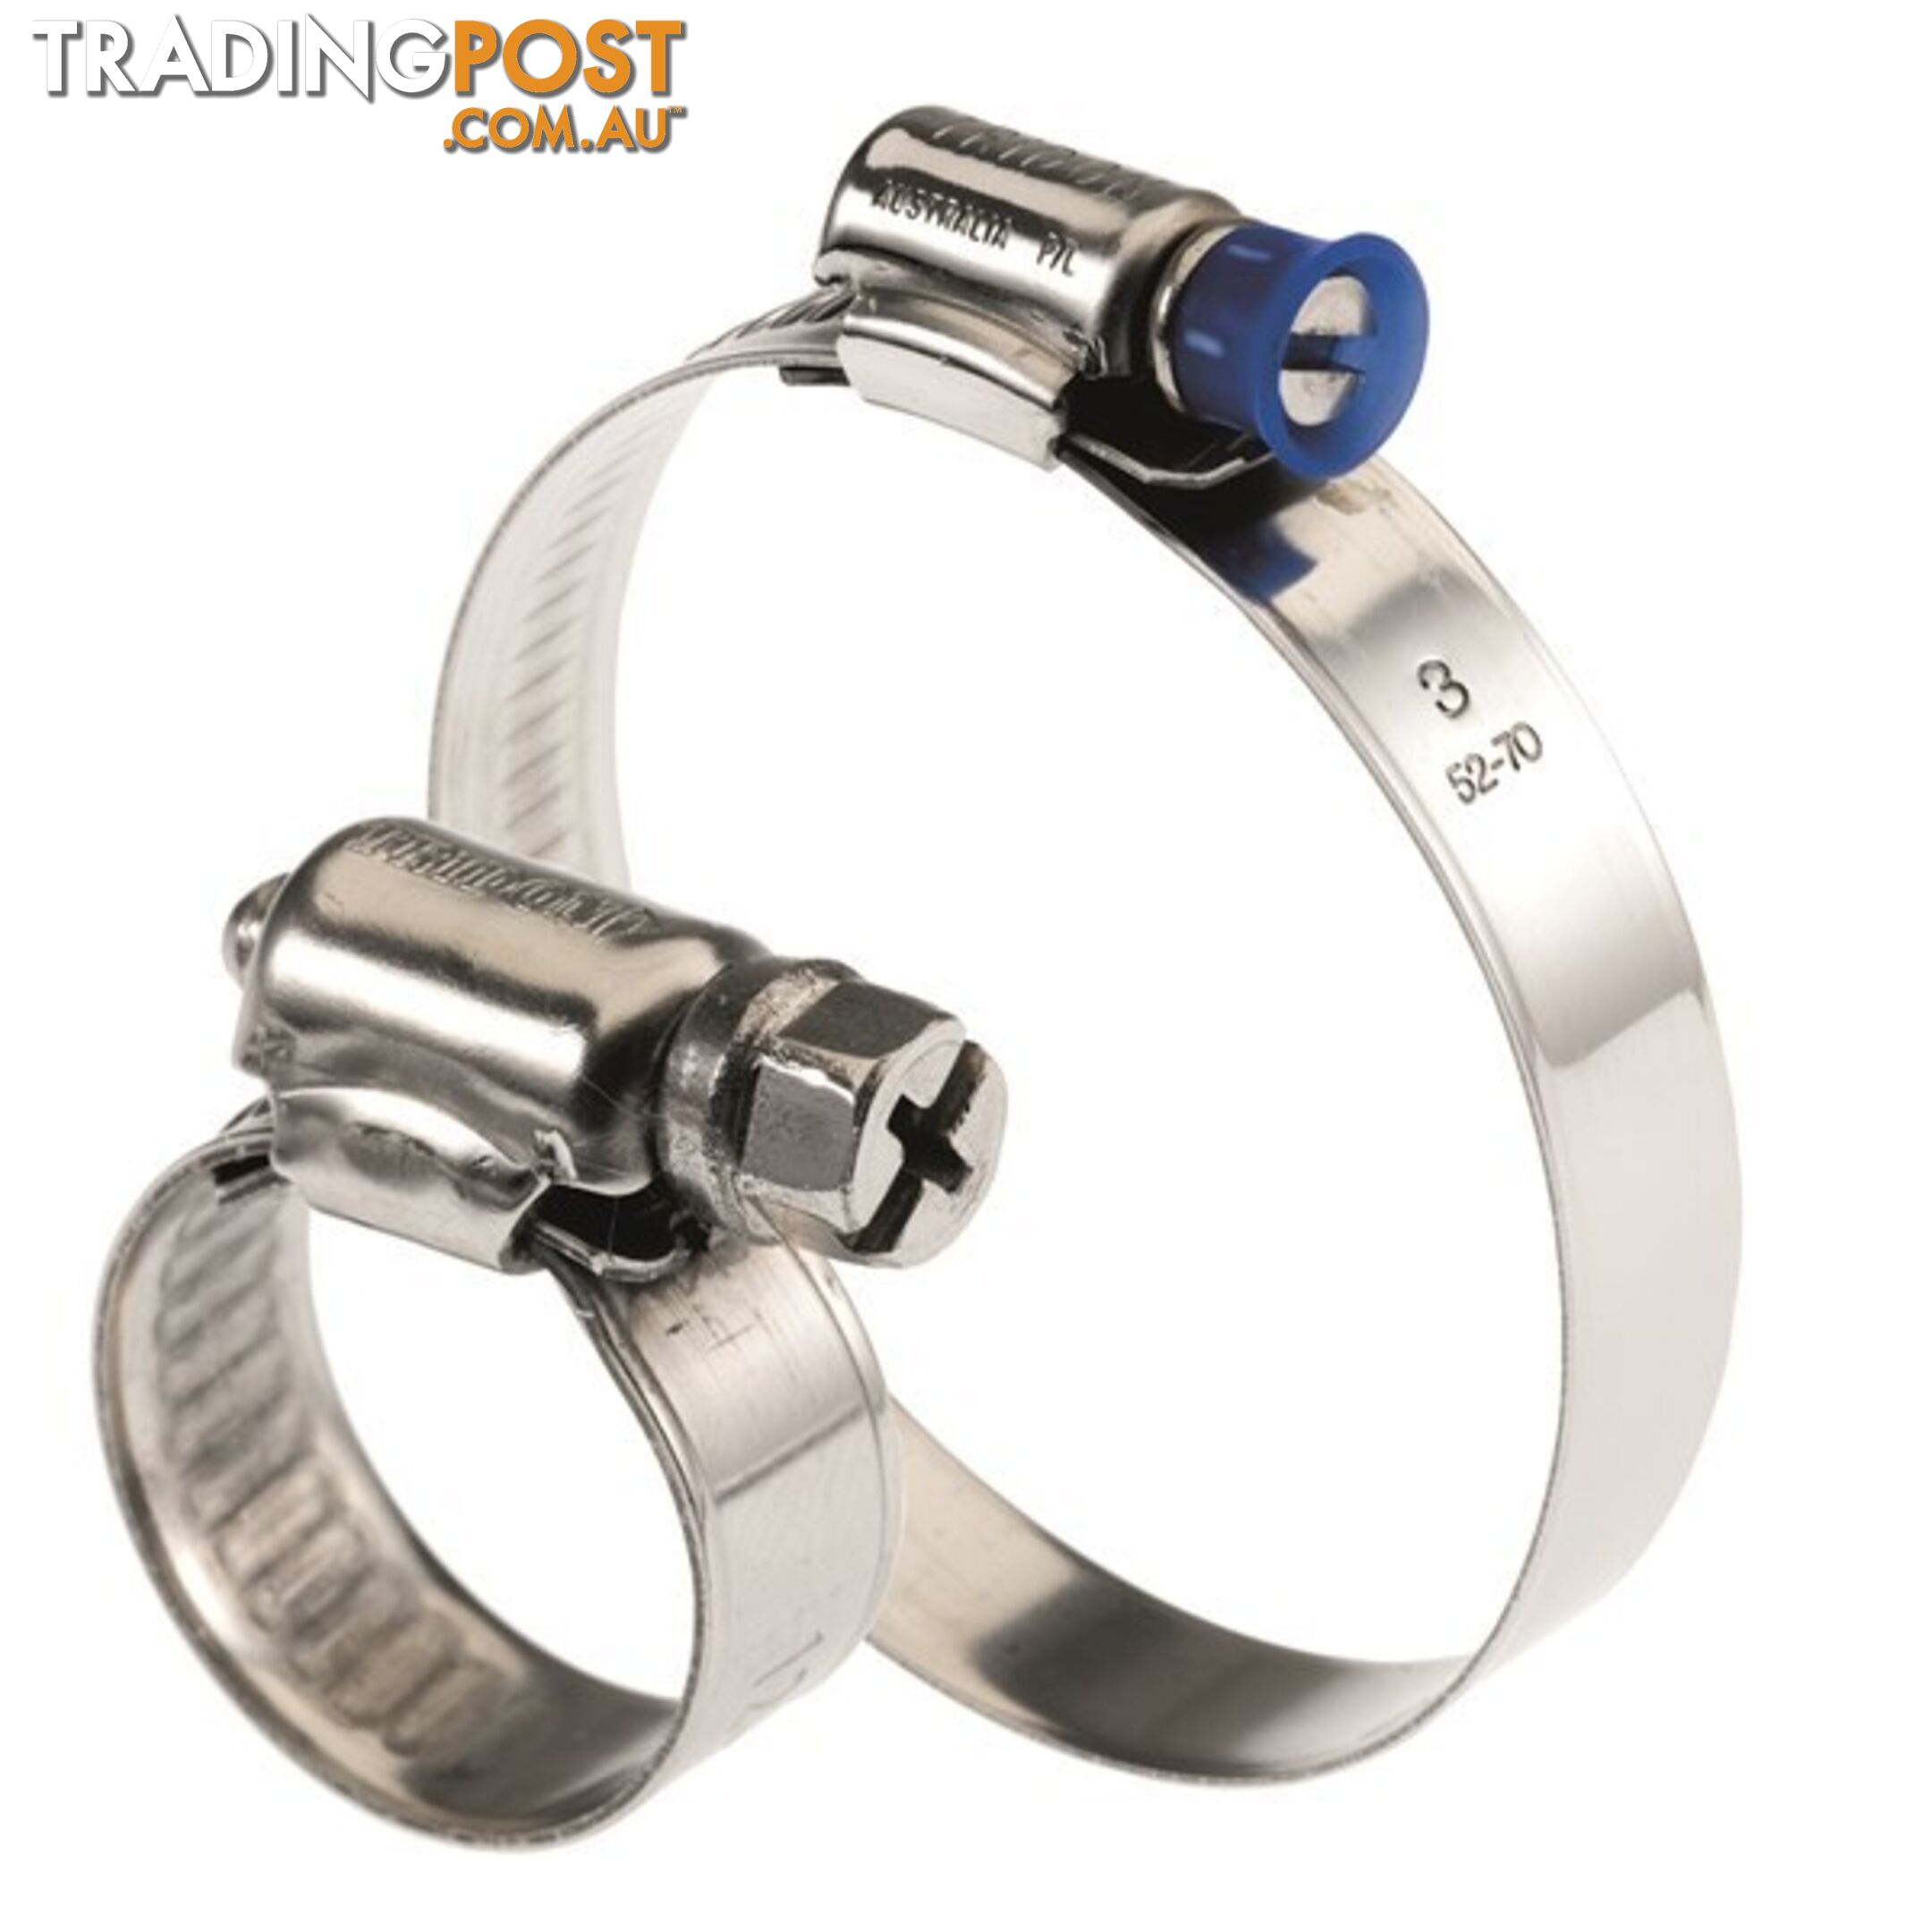 Tridon Hose Clamp 255 -280mm Regular Solid Band Collared Full S. Steel 10pk SKU - SMPC12